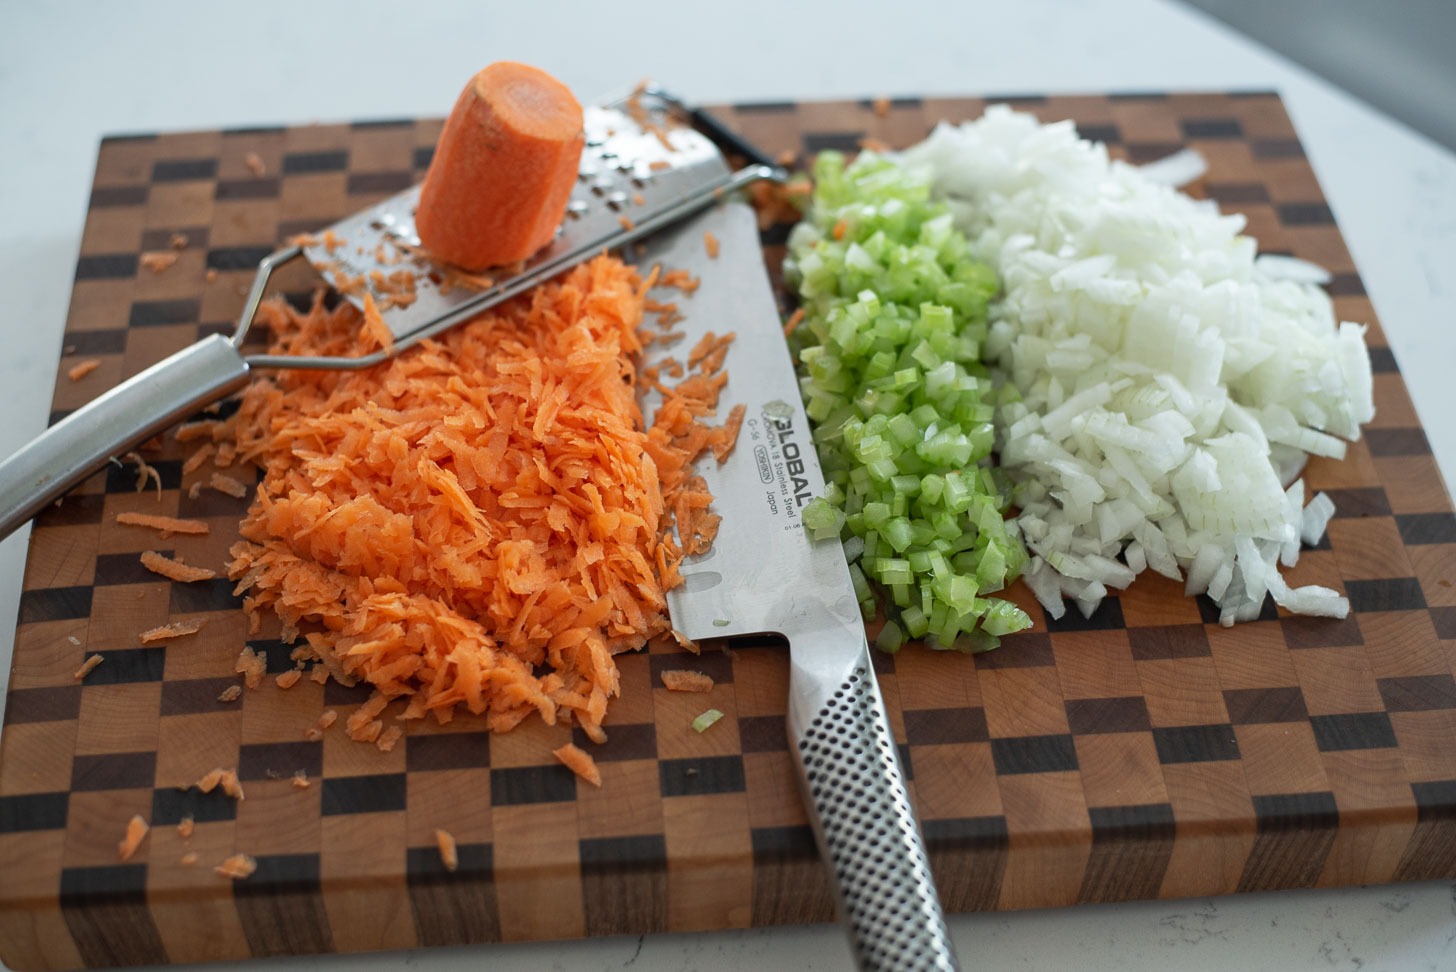 Onion, celery, carrot are finely chopped to make thick spaghetti sauce.